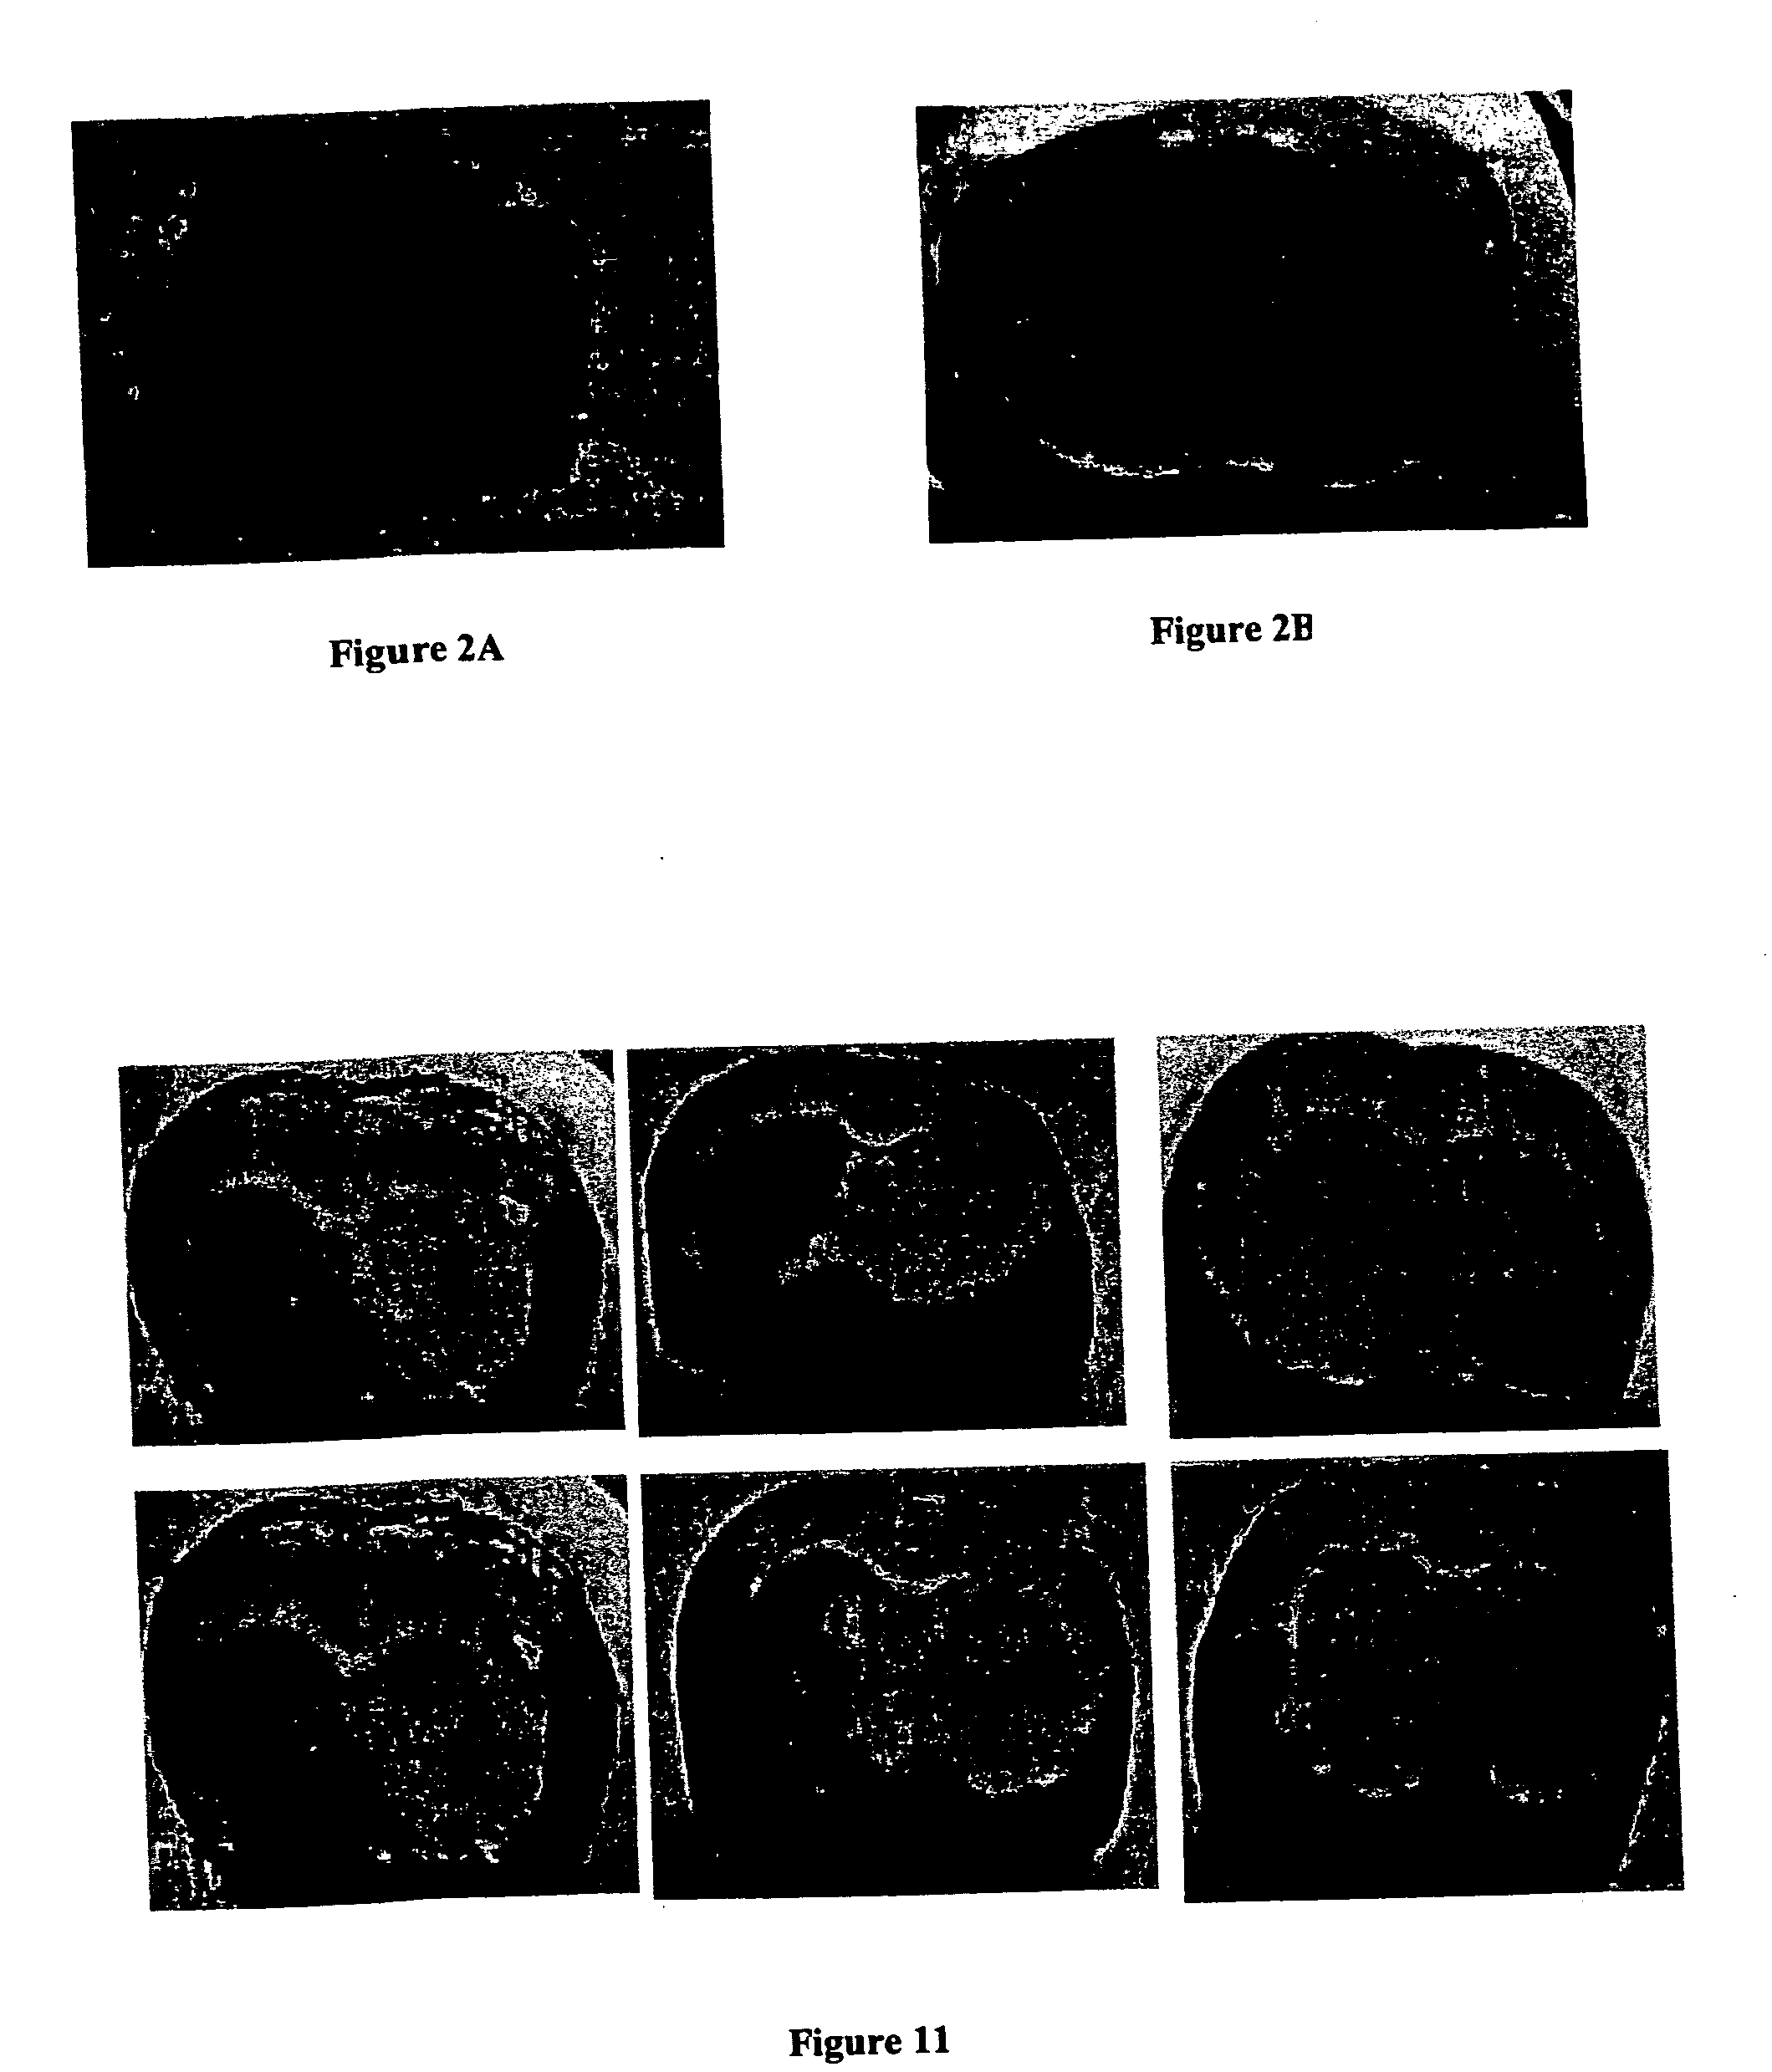 Method for using potassium channel activation for delivering a medicant to an abnormal brain region and/or a malignant tumor